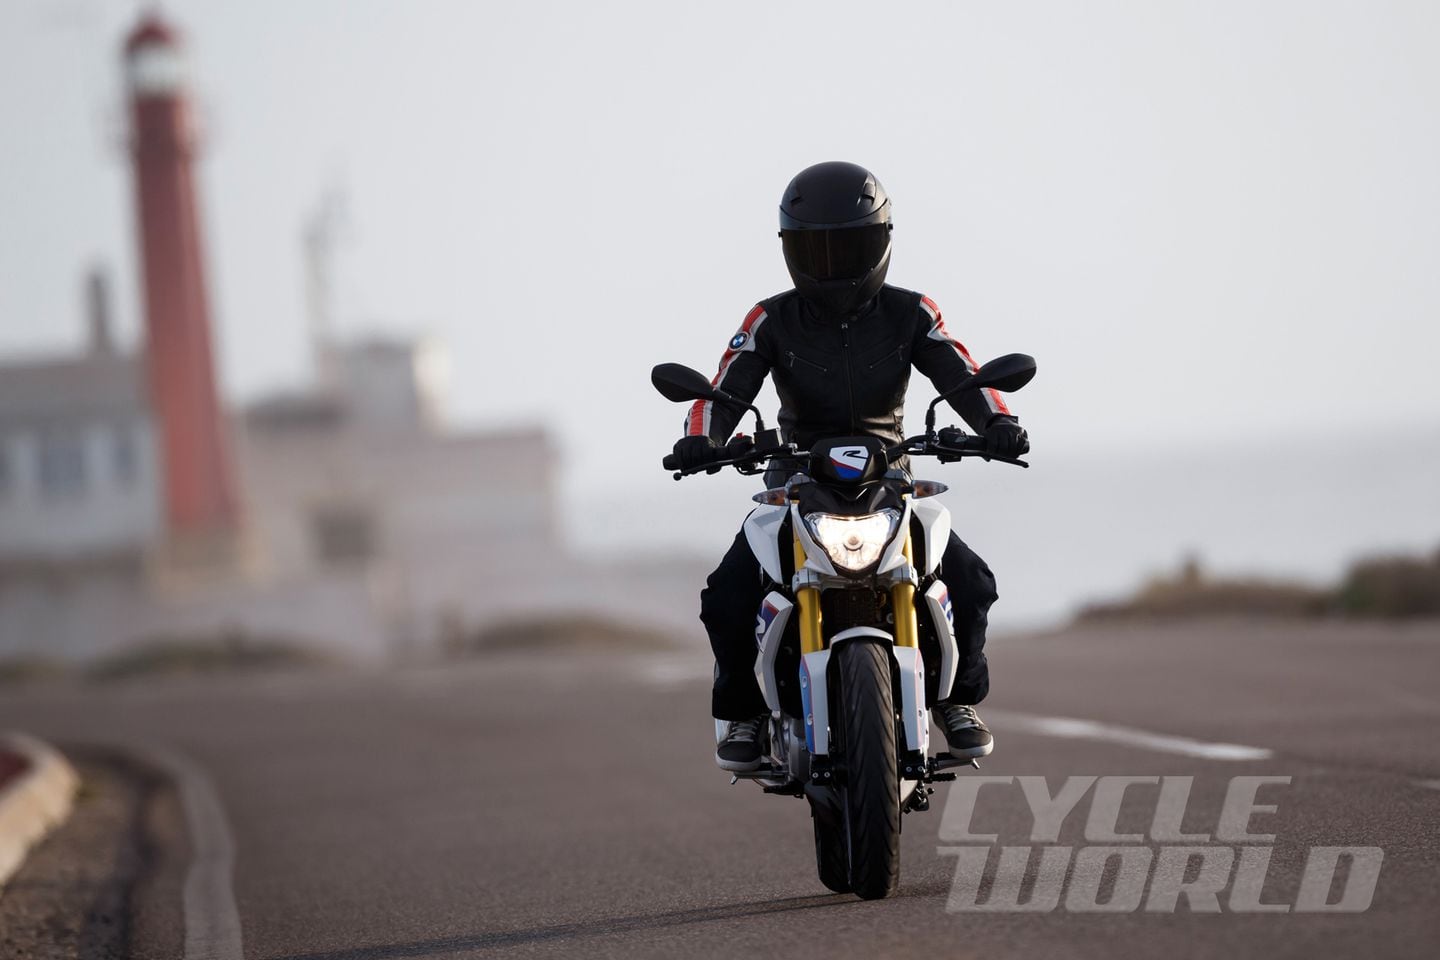 16 Bmw G310r Entry Level Motorcycle First Look Review Cycle World